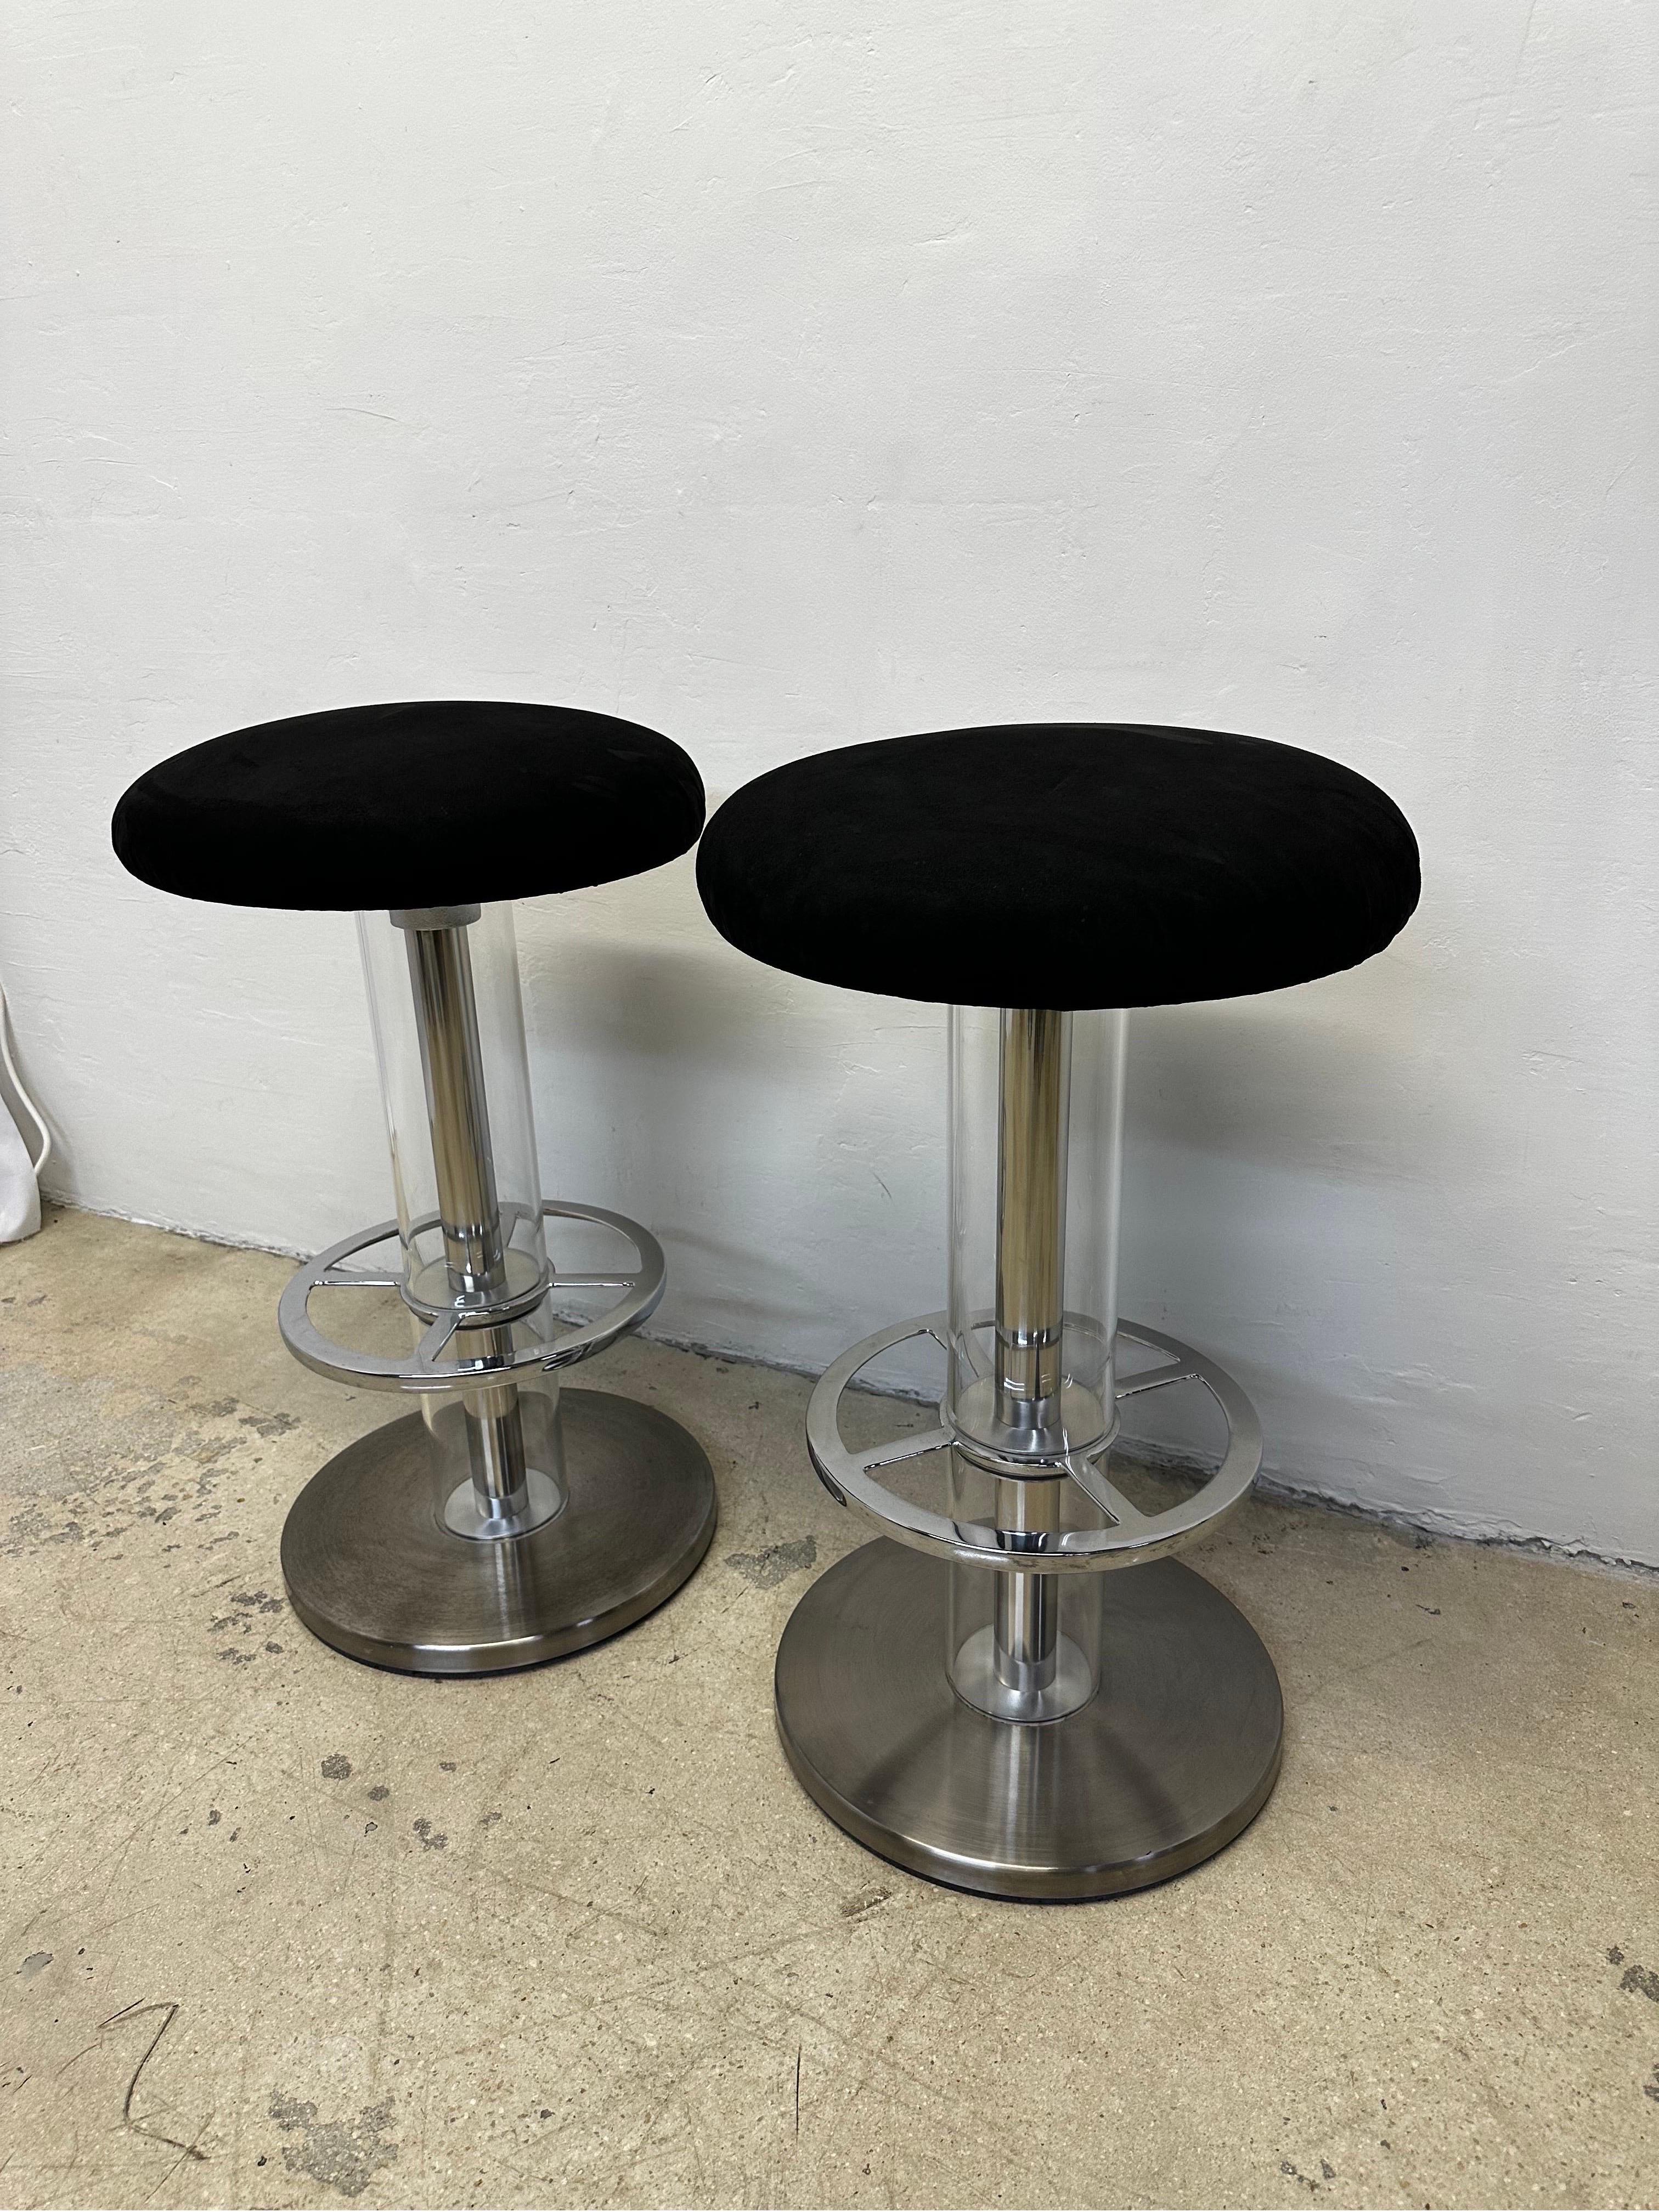 American Design for Leisure Steel and Black Ultra Suede Swivel Bar Stools - a Pair For Sale